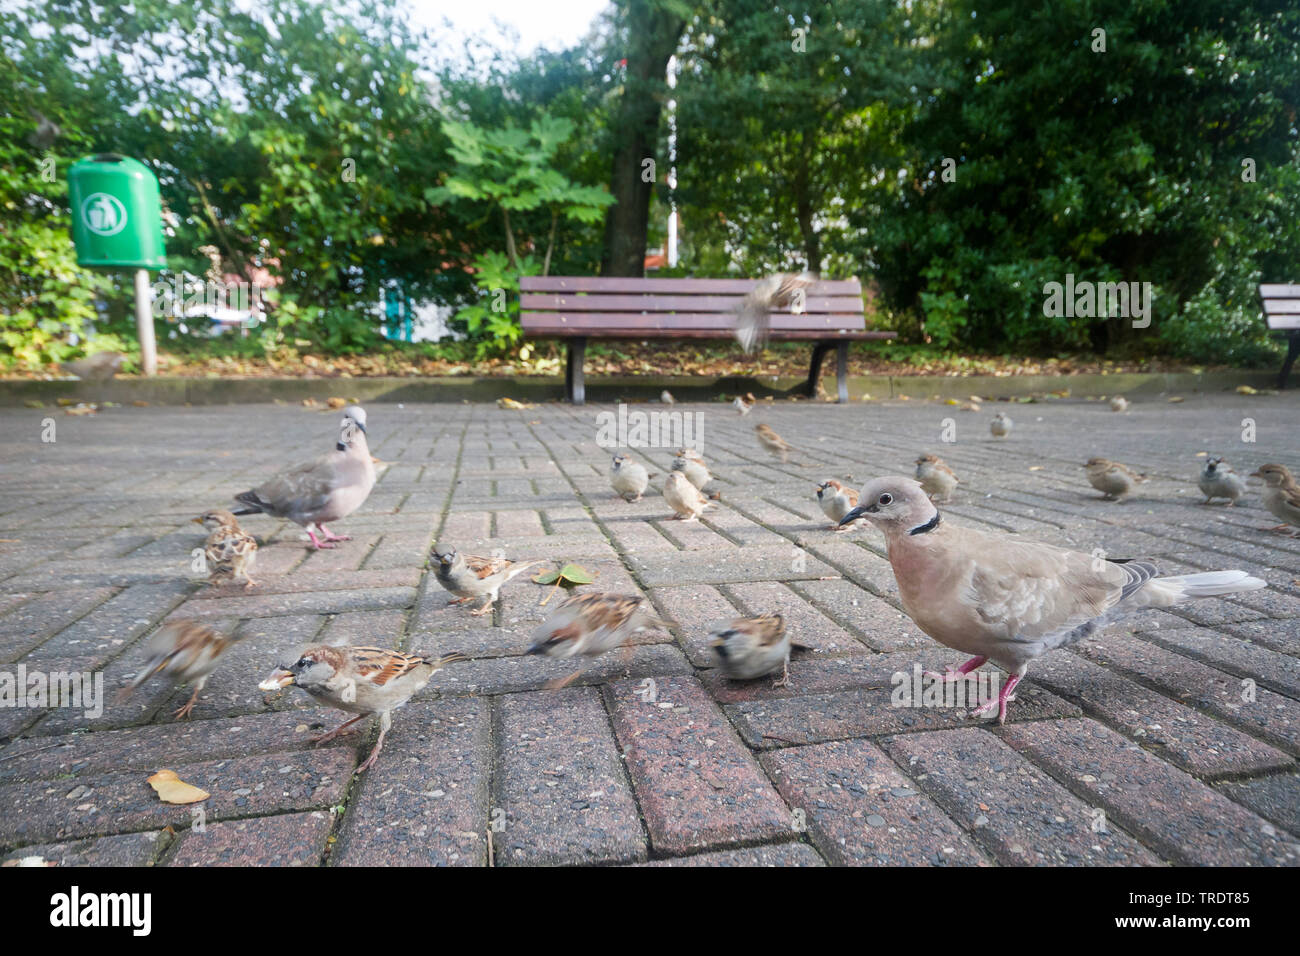 collared dove (Streptopelia decaocto), with house sparrows in urban area, Germany Stock Photo